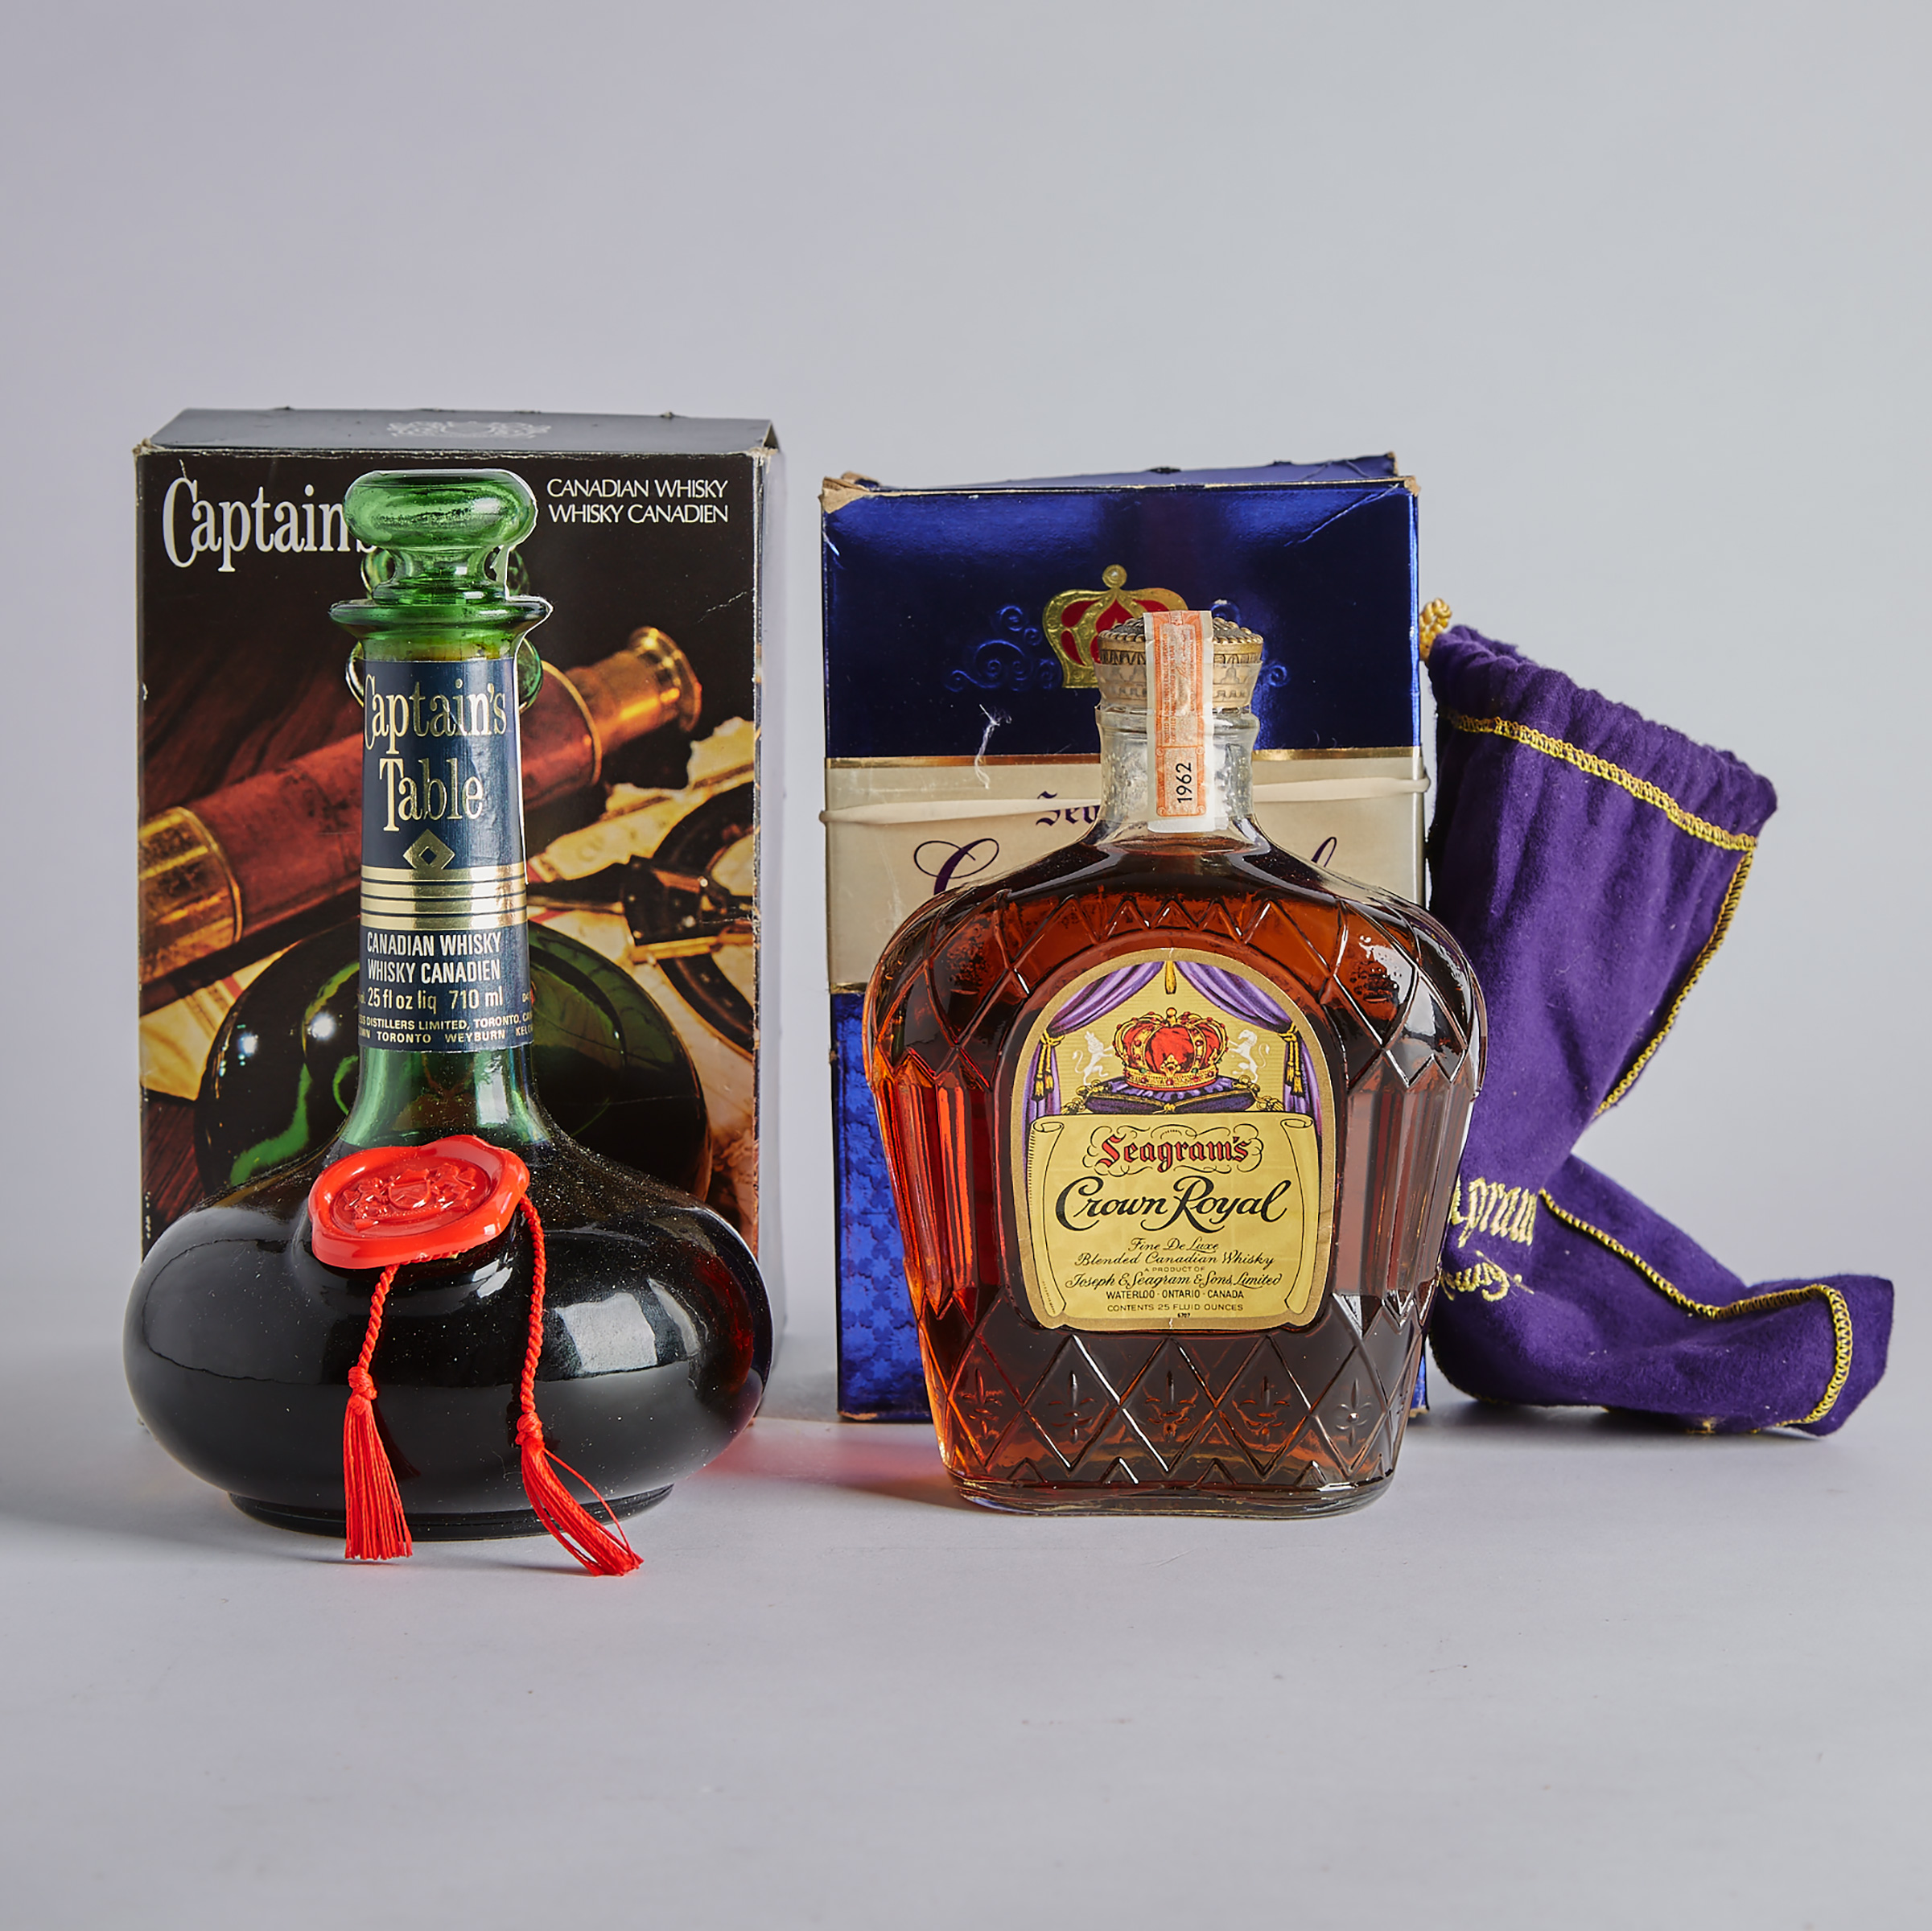 CAPTAIN’S TABLE CANADIAN WHISKY (ONE 25 FL OZ)
CROWN ROYAL DELUXE CANADIAN WHISKY (ONE 25 FL OZ)